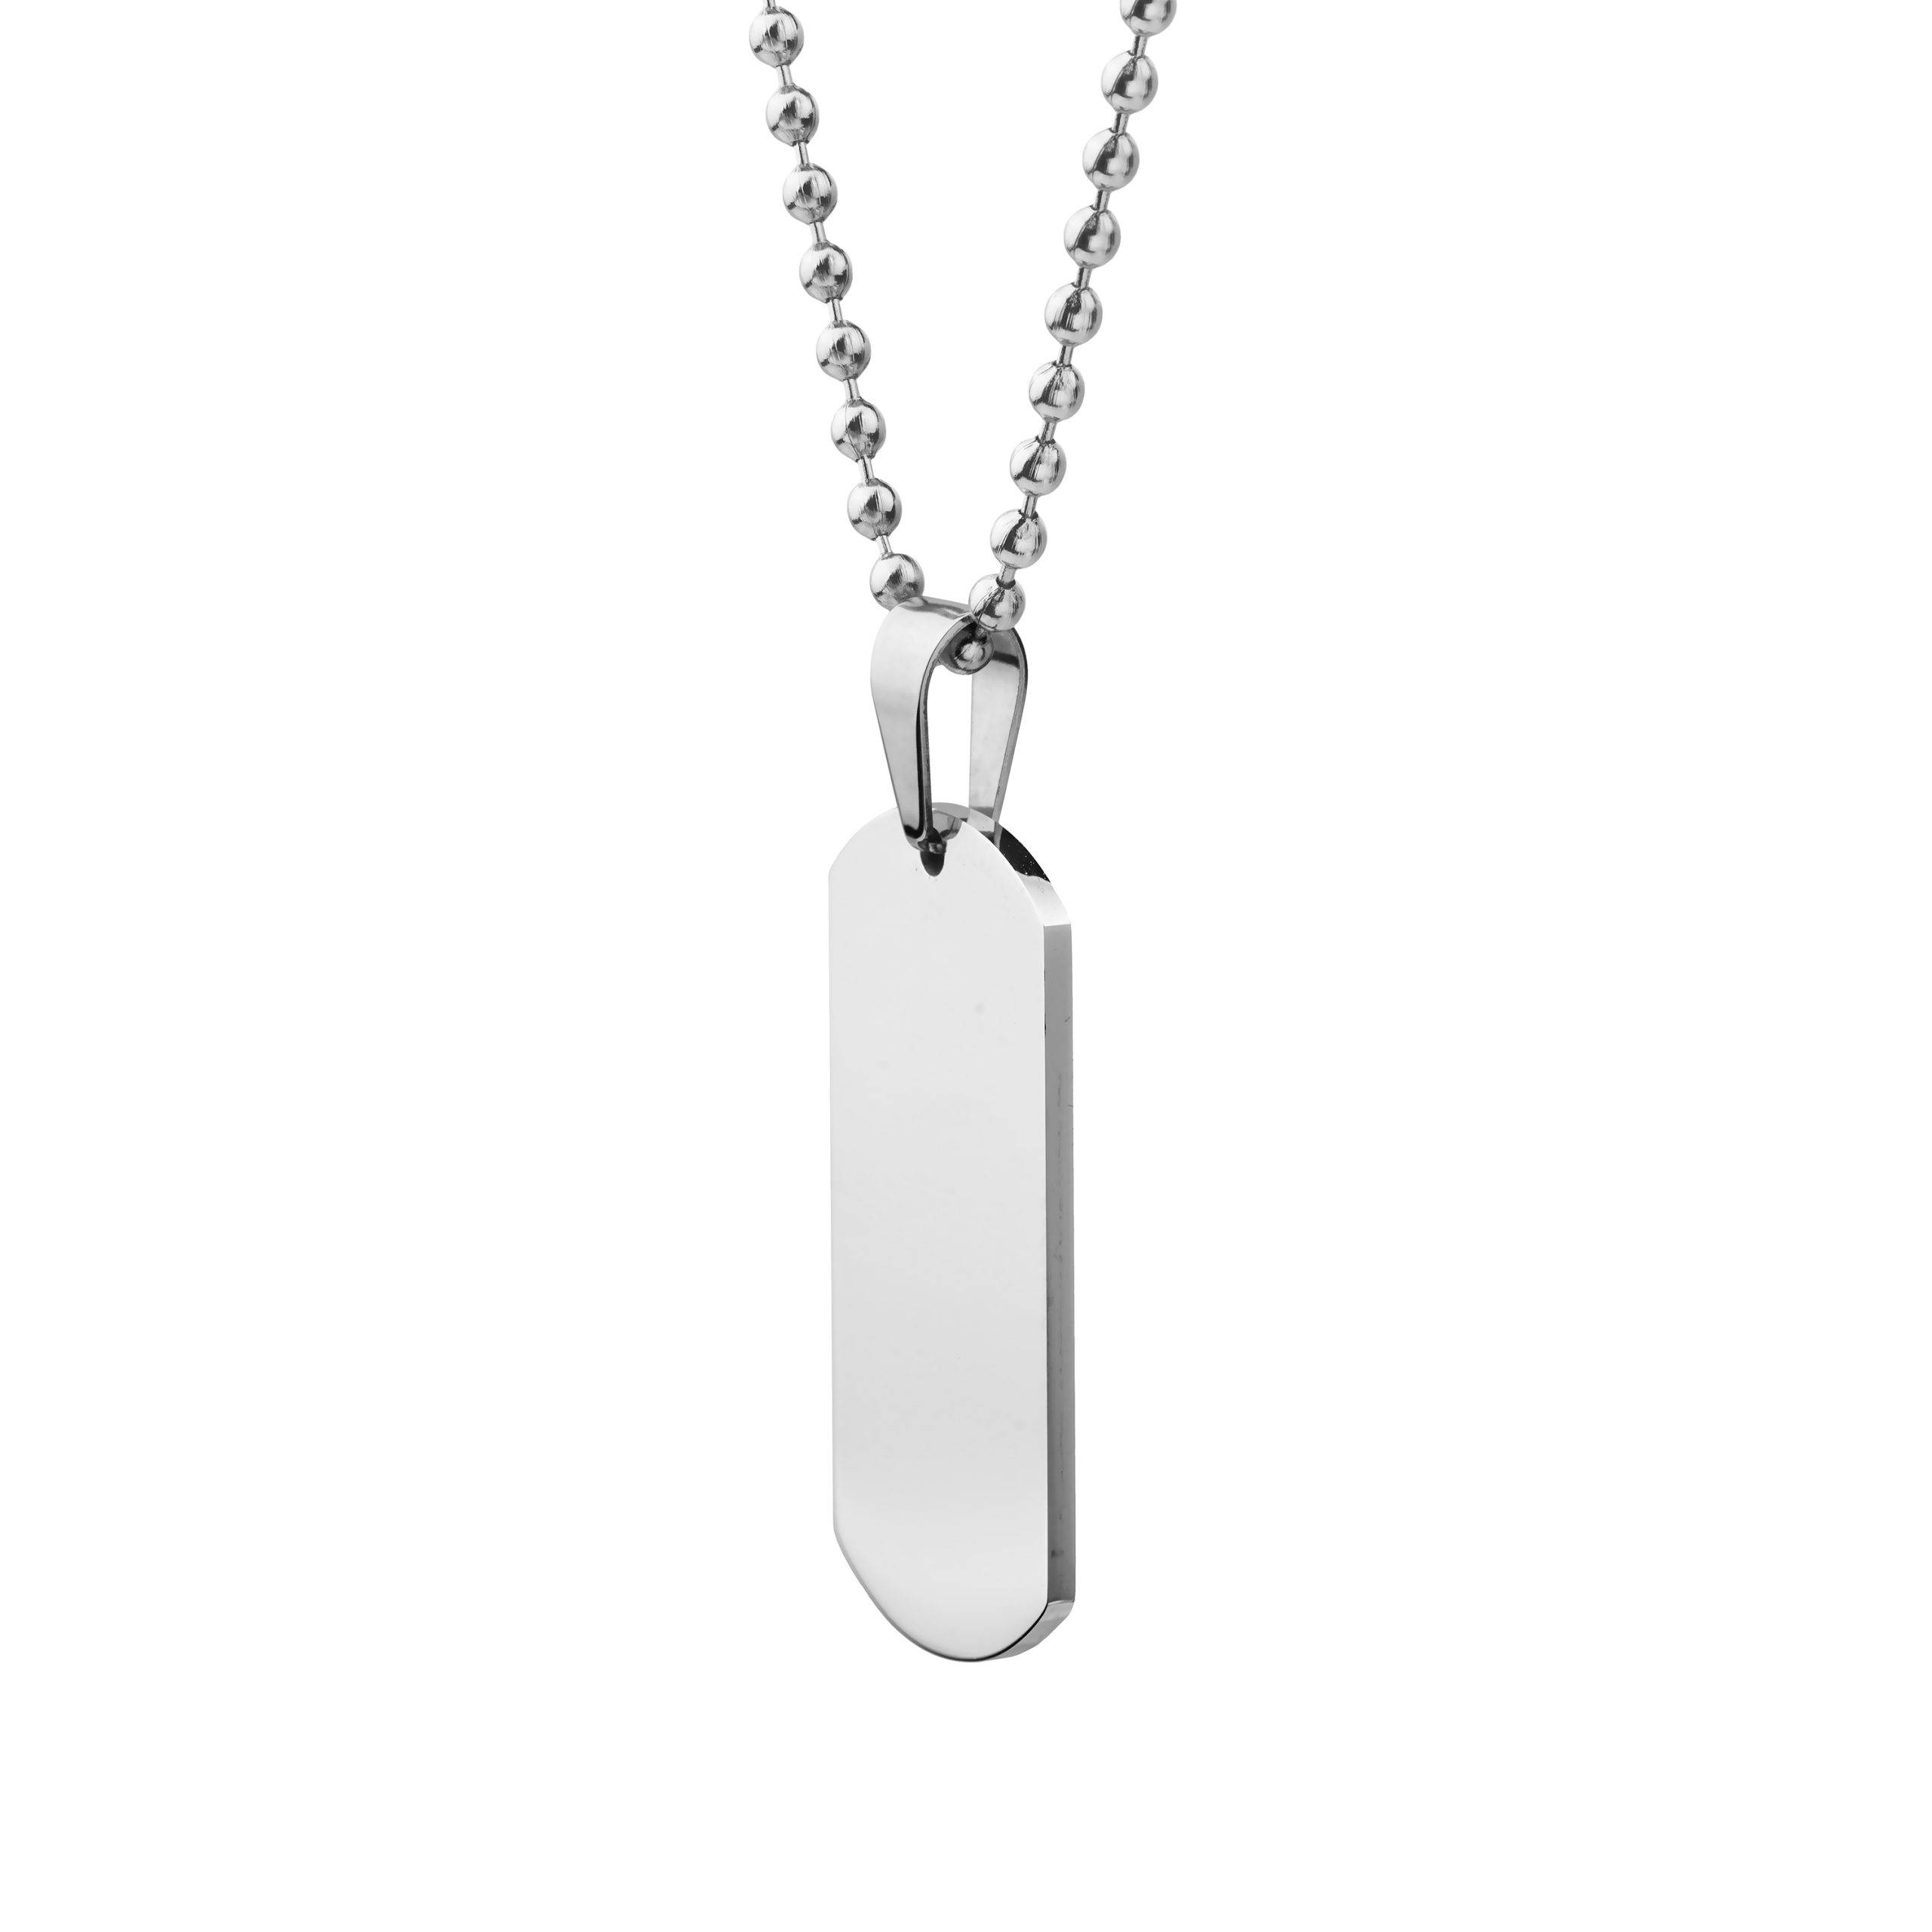 Steel Men's Dog Tag Necklace | Engraved Jewellery | Top Gifts For Men